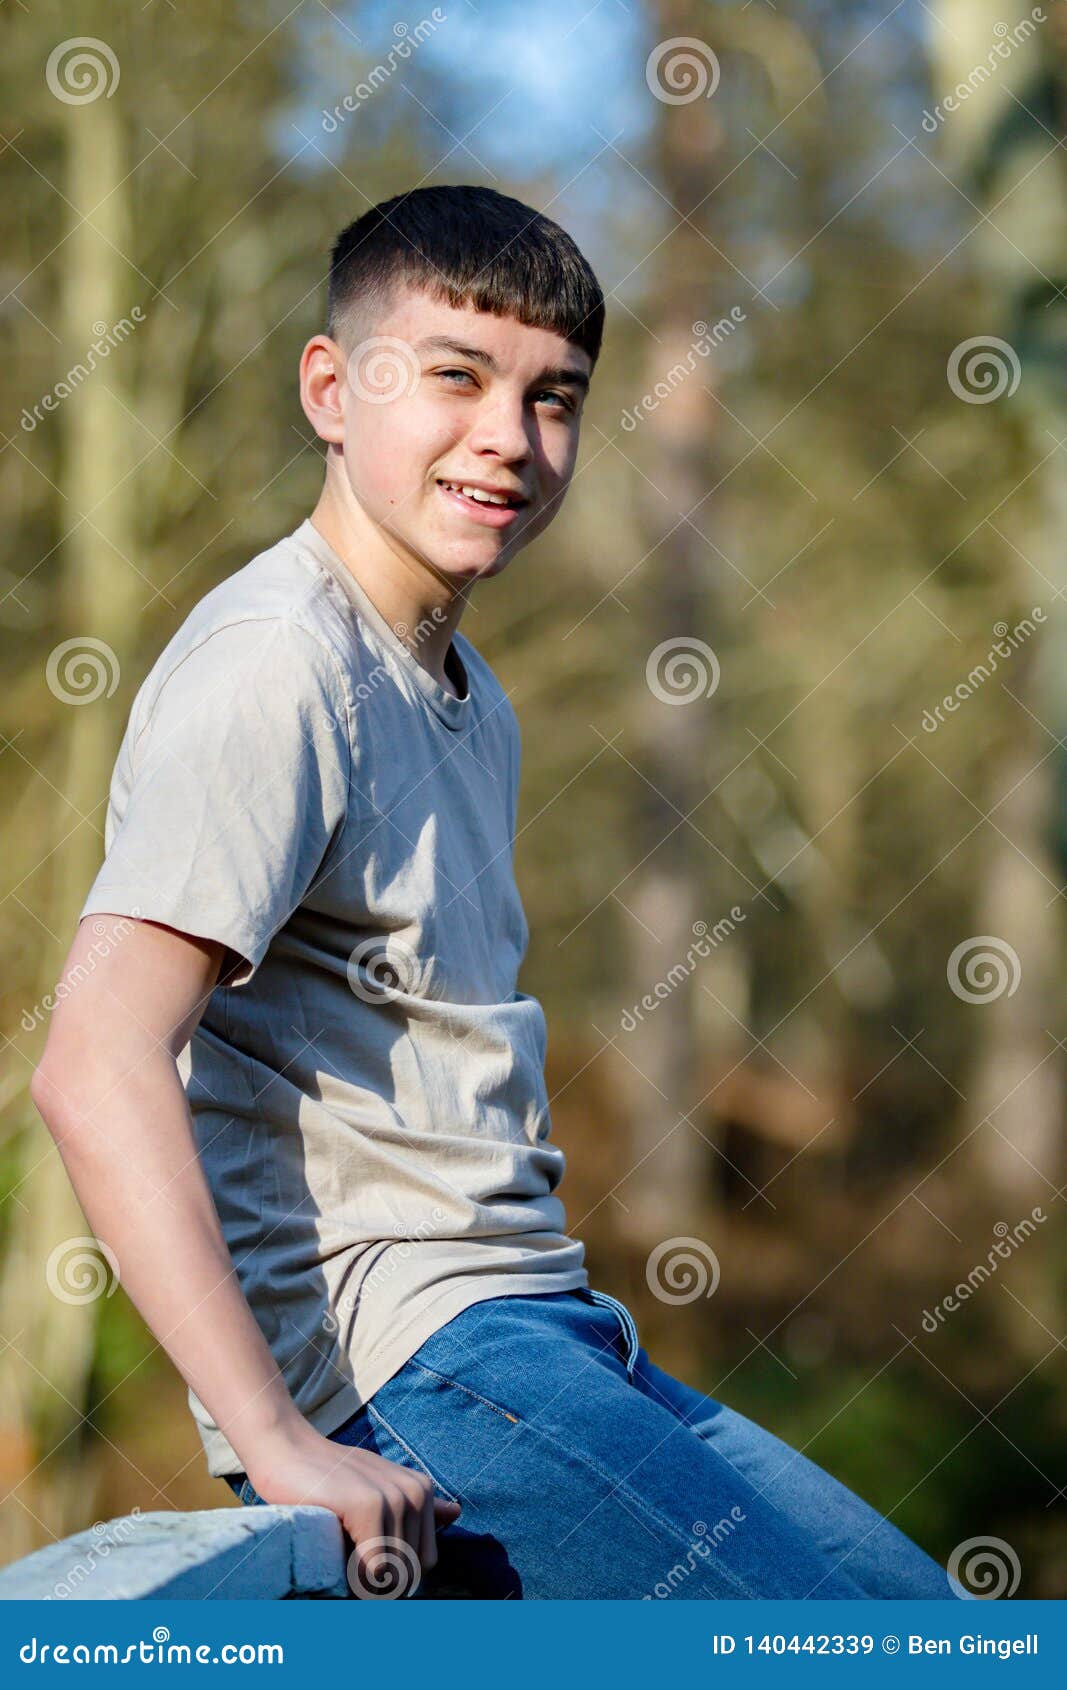 Teenage Boy Outside on a Bright Spring Day Stock Image - Image of smile ...